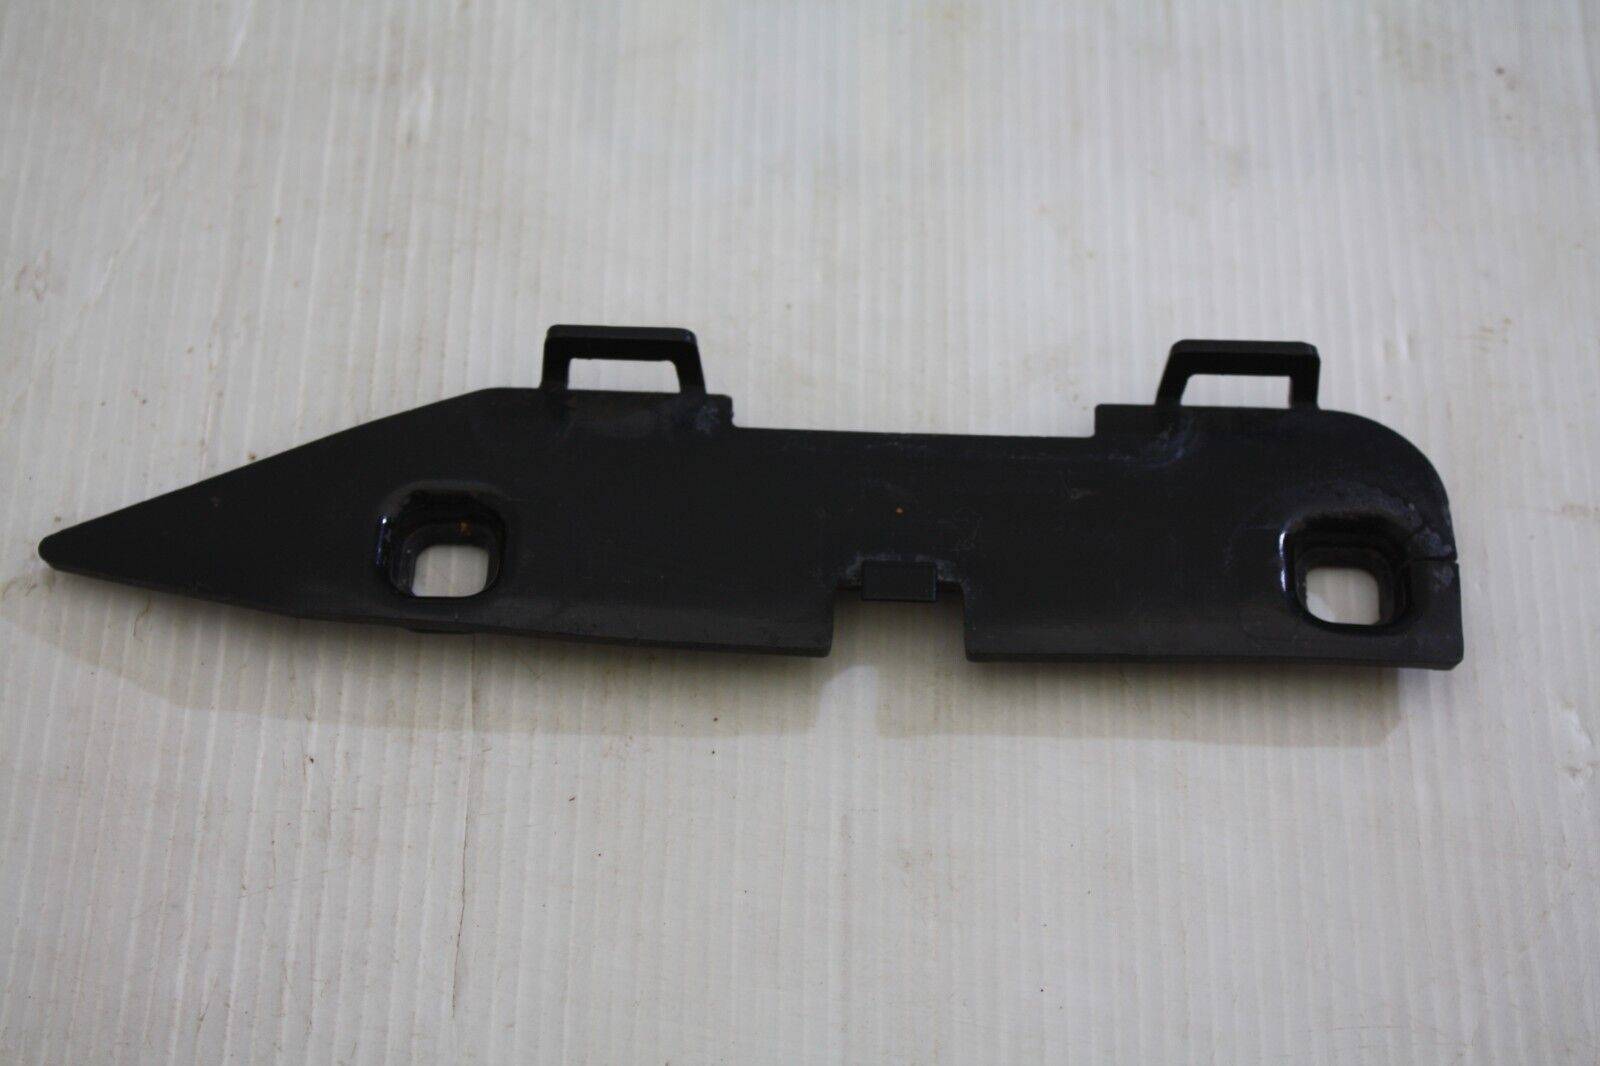 BMW-X1-F48-Front-Bumper-Right-Fixing-Bracket-2015-To-2019-51117301576-Genuine-176355690969